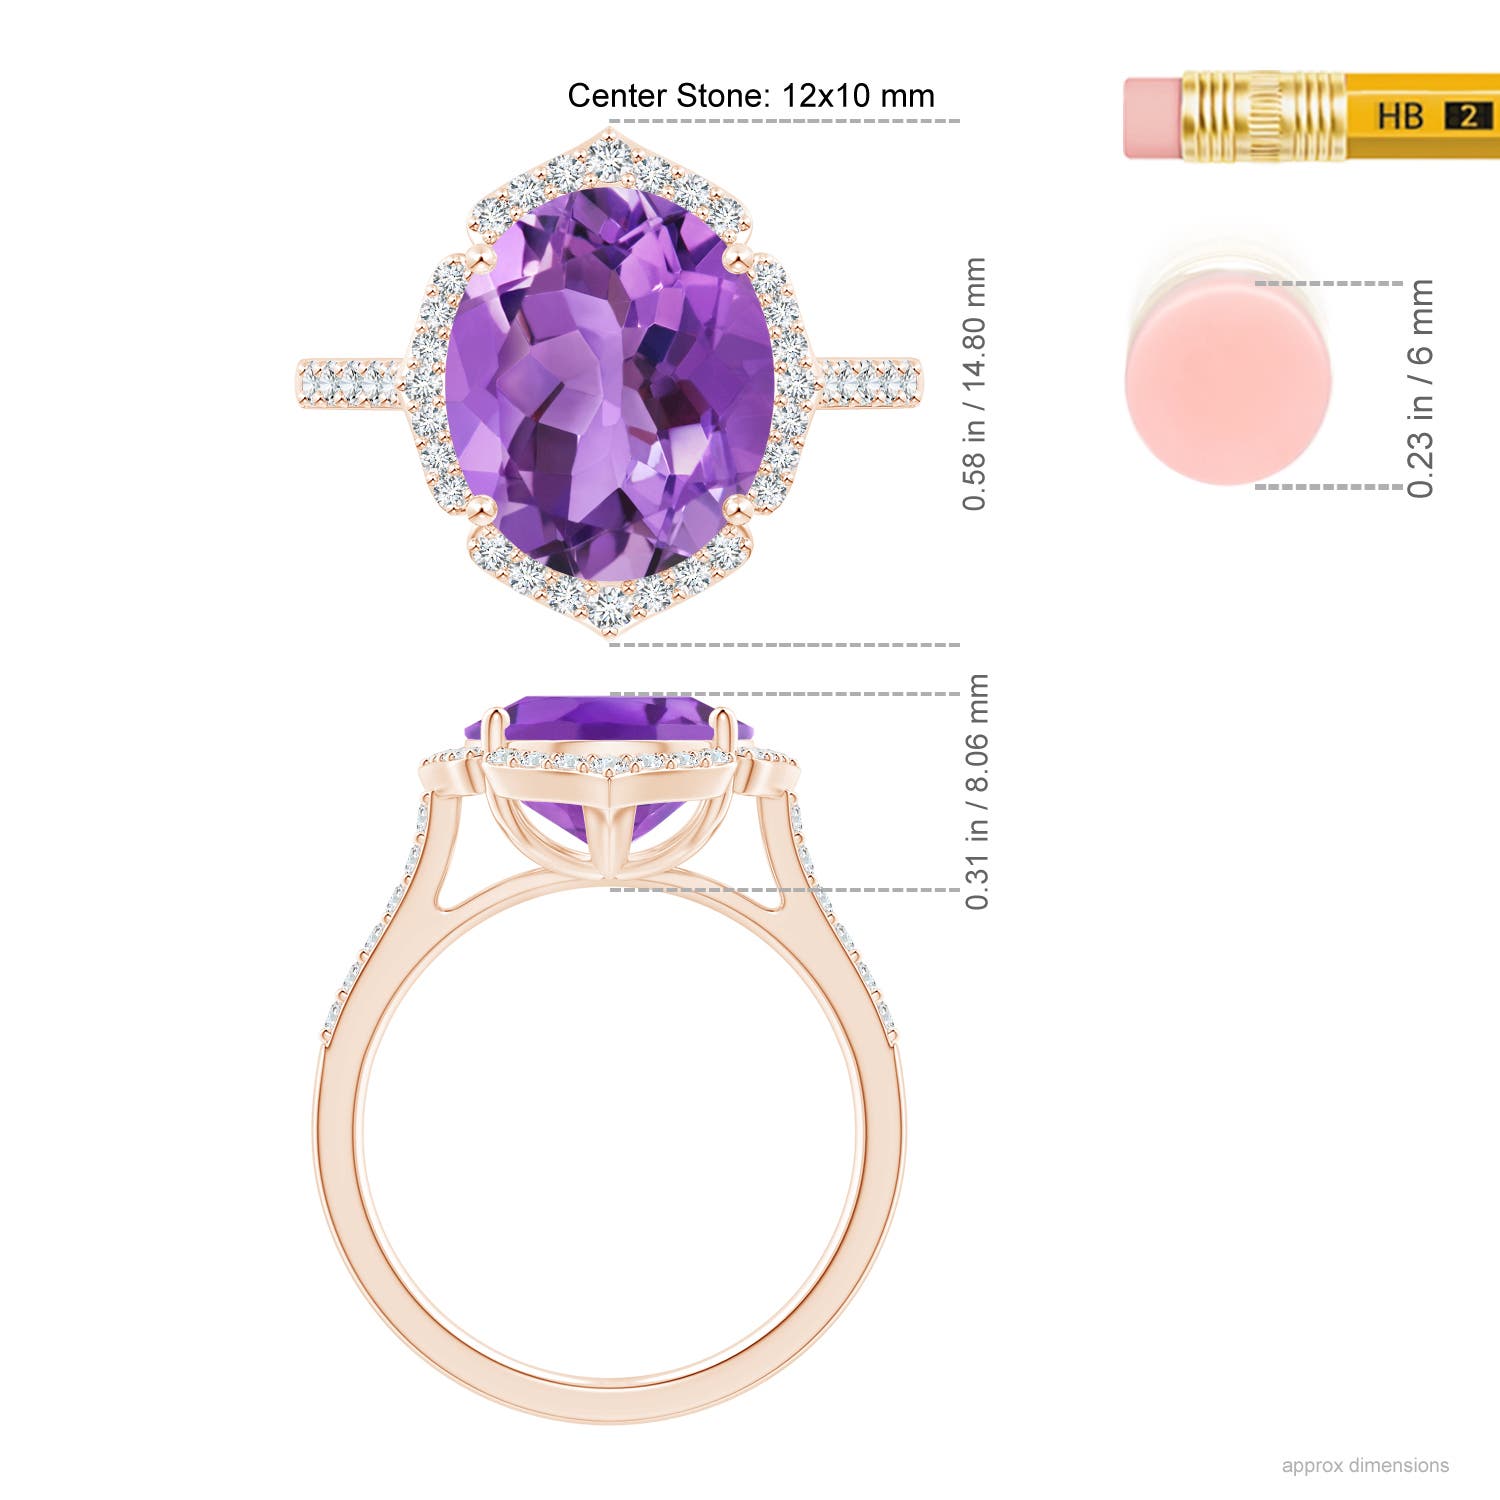 AA - Amethyst / 4.59 CT / 14 KT Rose Gold